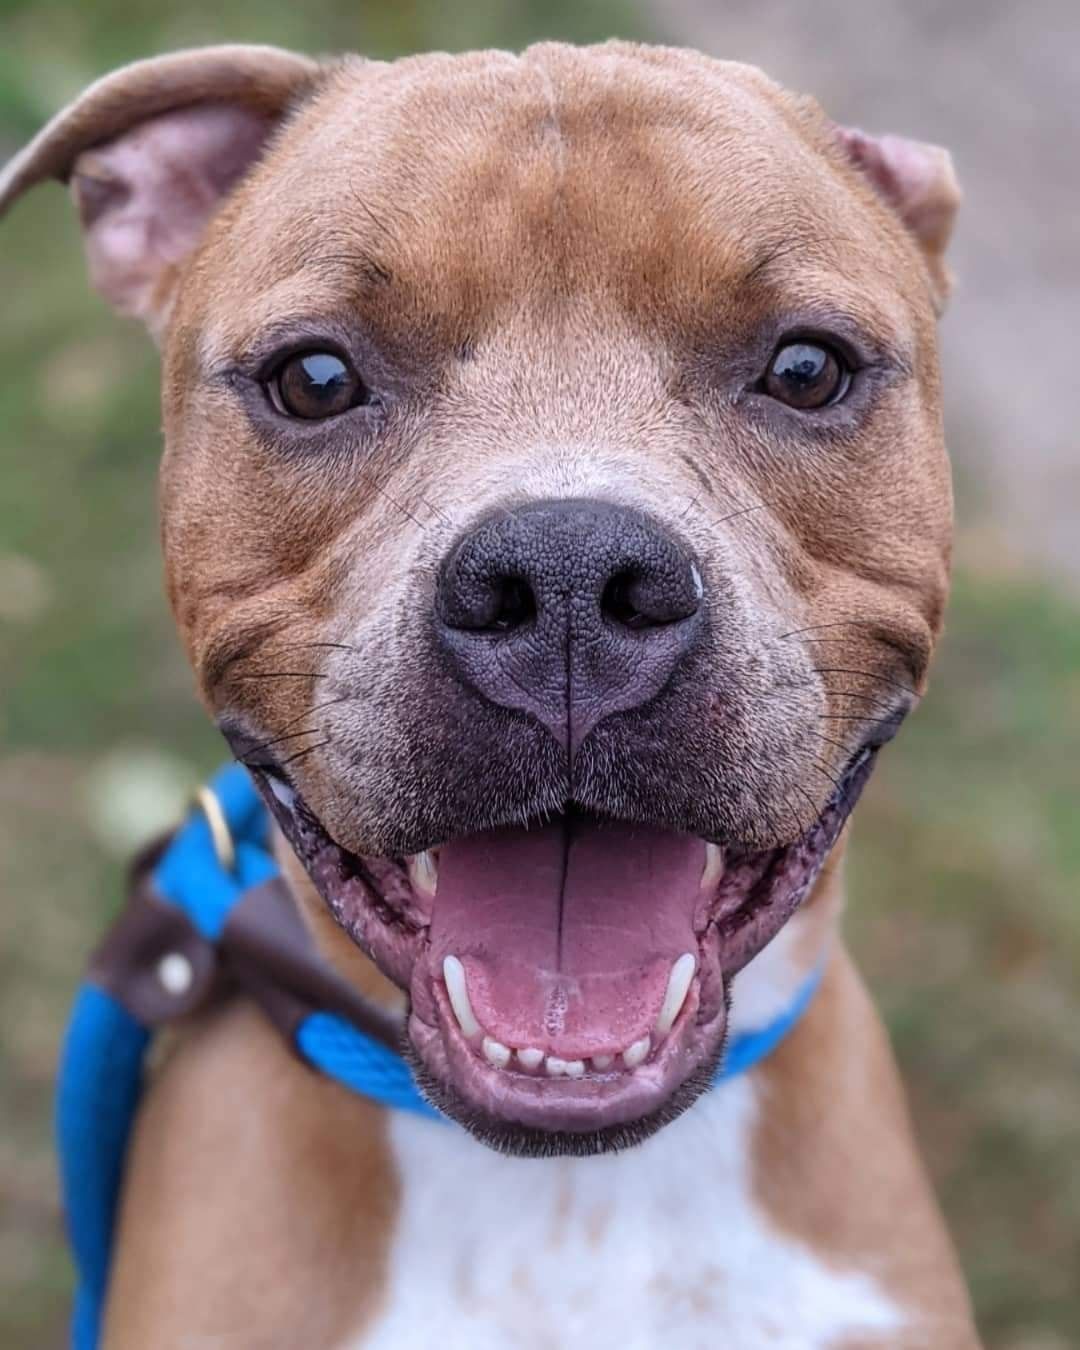 If Bronson is this outstandingly cute as a full grown boy, can you even IMAAAAAGINE the level of cuteness he must have had as a baby puppy?! says our volunteer Amy. 😍🥺🥰
✅ Dog Lover
✅ Cute TEEFIES
✅ Always Smiling
✅ LOVERBOY

And we couldn't agree more!! This boy exudes pure JOY!!! Bronson is just one of our cuties for our <a target='_blank' href='https://www.instagram.com/explore/tags/545FosterFriday/'>#545FosterFriday</a>! 
 
Fill out an application today ⬇️
FOSTER: https://www.icarestl.org/foster
Walk-in adoptions welcome Tuesday-Sunday, 11AM-5 PM

We may be having a CUTENESS competition this week! Next up.... 

Bumble:
✅ Over-the-top CUTE
✅ Friendly
✅ Newbie To CARE
✅ Soulful Eyes 👀

Linda:
✅  EARS For Days!
✅ Snuggle Bug
✅ Affectionate

Rasta:
✅ Sweetheart
✅ Newbie To CARE
✅ Face Will Make You Melt 🥰

Agostini:
✅ Newbie
✅ Laid-back
✅  Sweet!!! 🍭🍭

Fill out an application today ⬇️
FOSTER: https://www.icarestl.org/foster
<a target='_blank' href='https://www.instagram.com/explore/tags/DogsofInstagram/'>#DogsofInstagram</a> <a target='_blank' href='https://www.instagram.com/explore/tags/CareSTLDogs/'>#CareSTLDogs</a> <a target='_blank' href='https://www.instagram.com/explore/tags/FosteringSavesLives/'>#FosteringSavesLives</a>